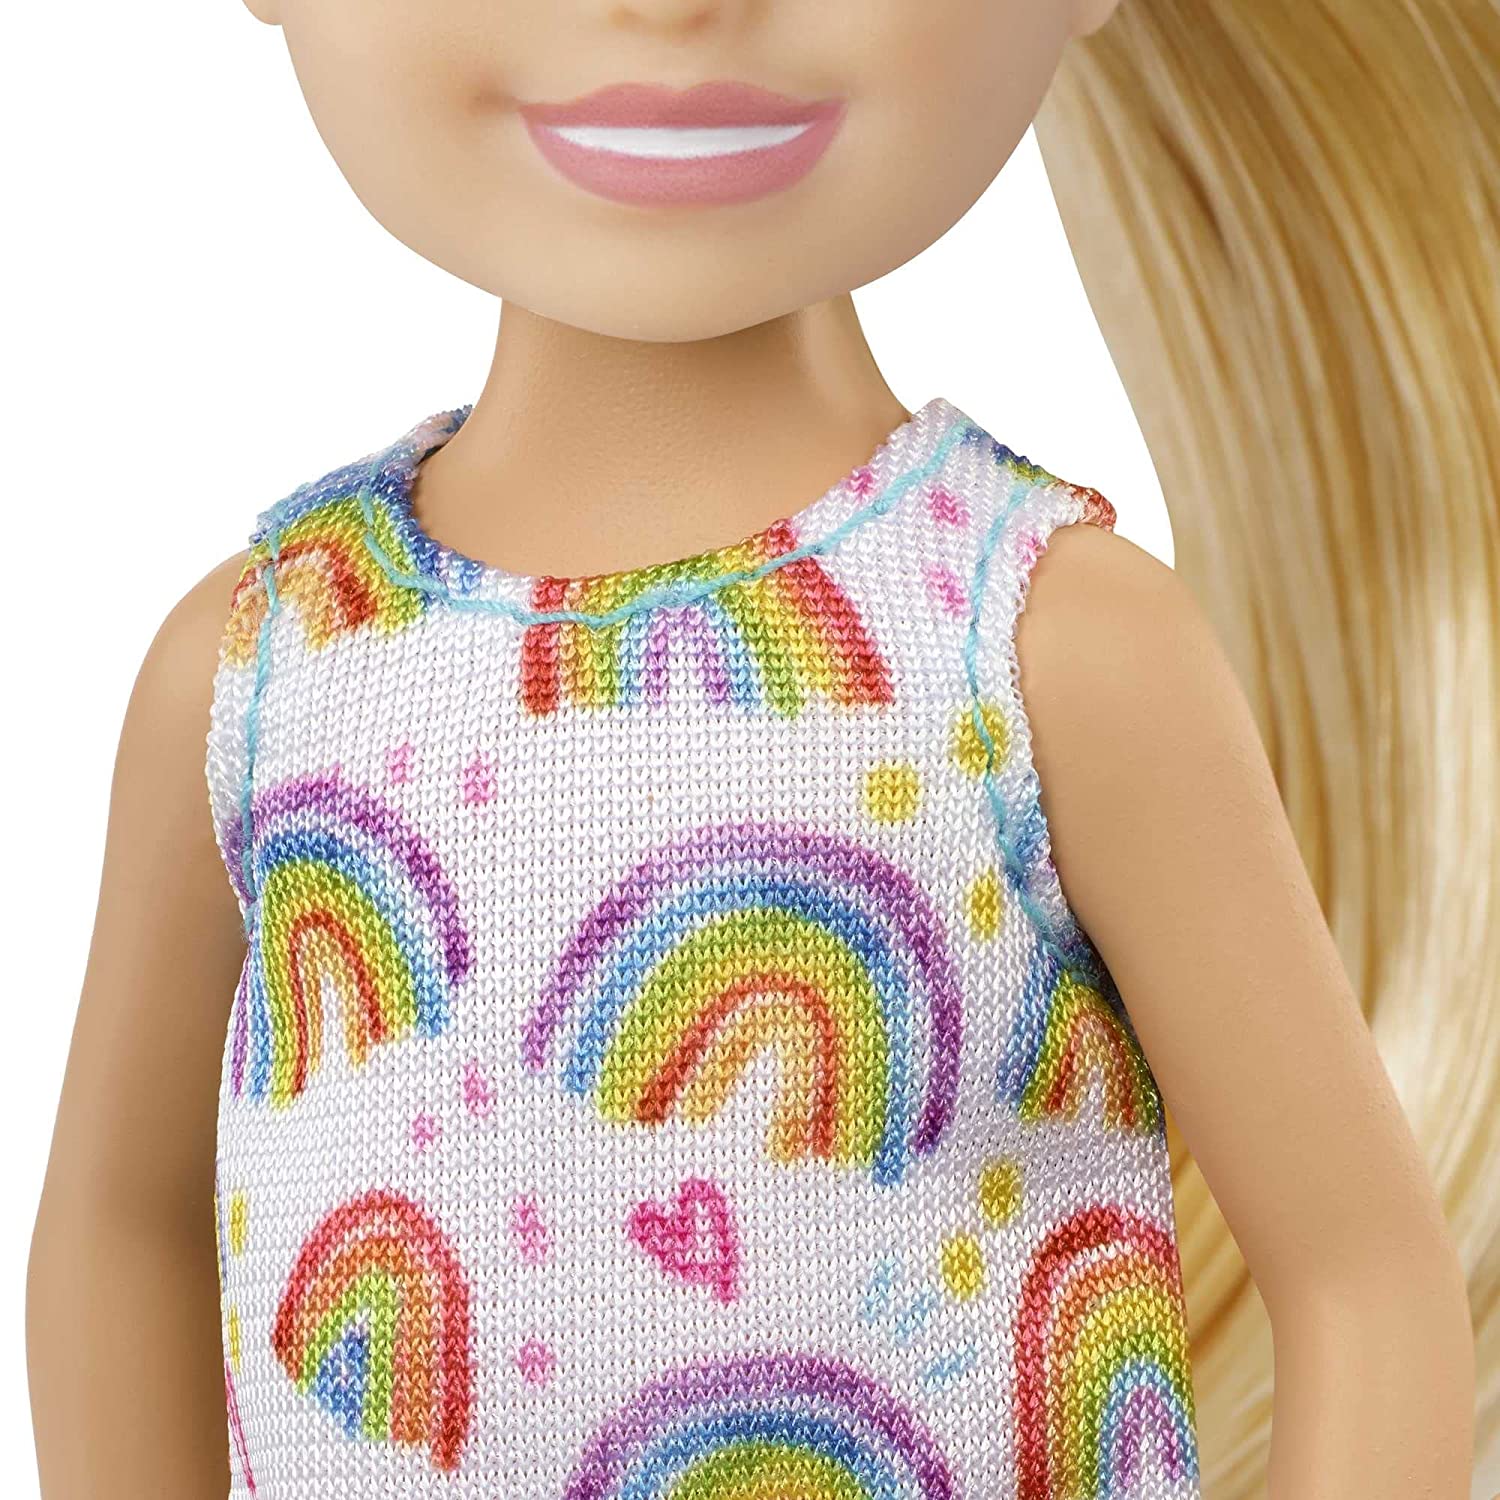 Barbie Chelsea 6 Inch Doll Blonde Hair Wearing Rainbow-Print Dress and Yellow Shoes for Kids Ages 3 Years Old & Up